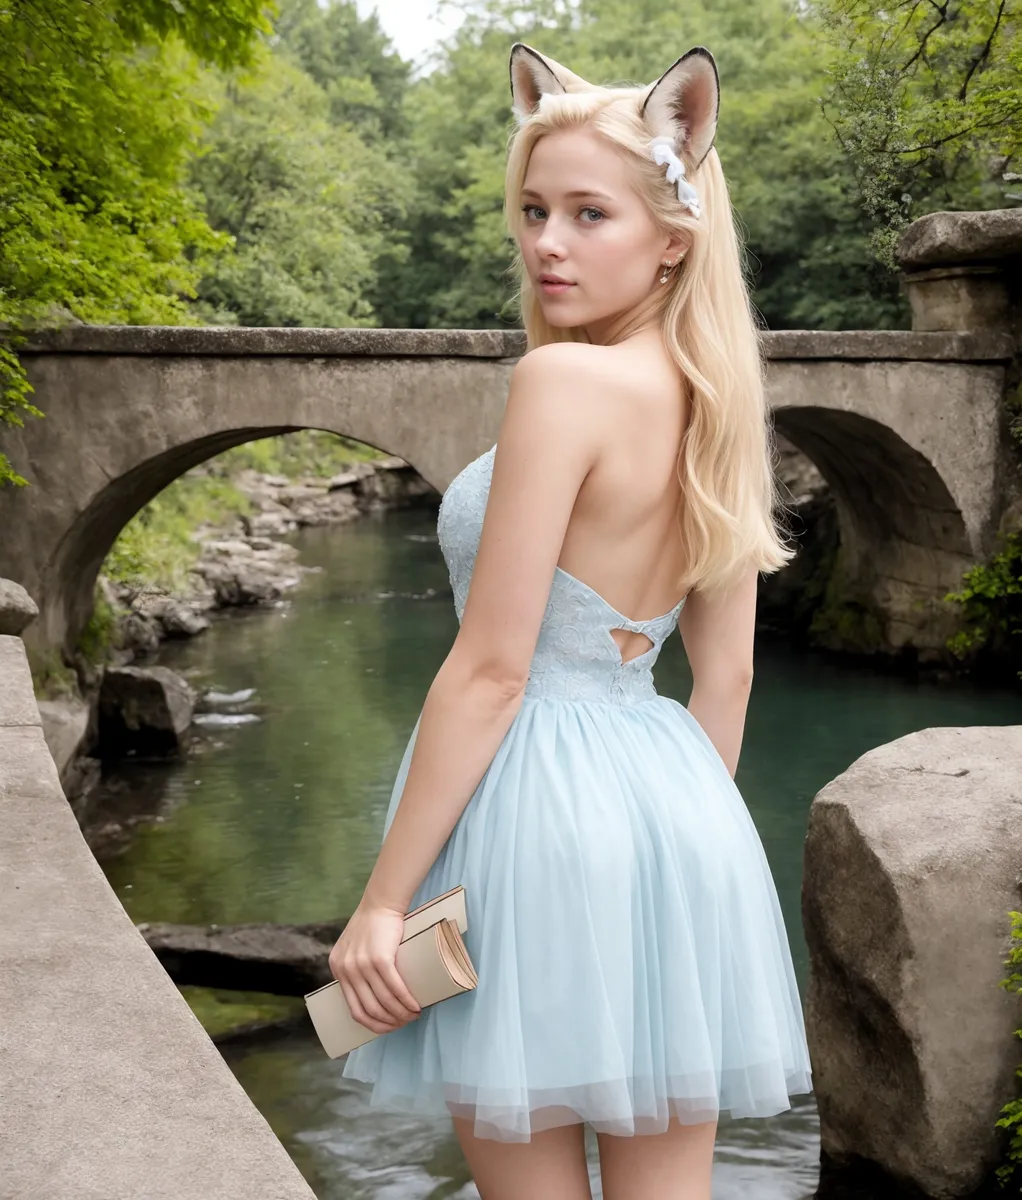 Fantasy character cosplay in a light blue dress with cat ears standing on a forest bridge, AI generated image using stable diffusion.